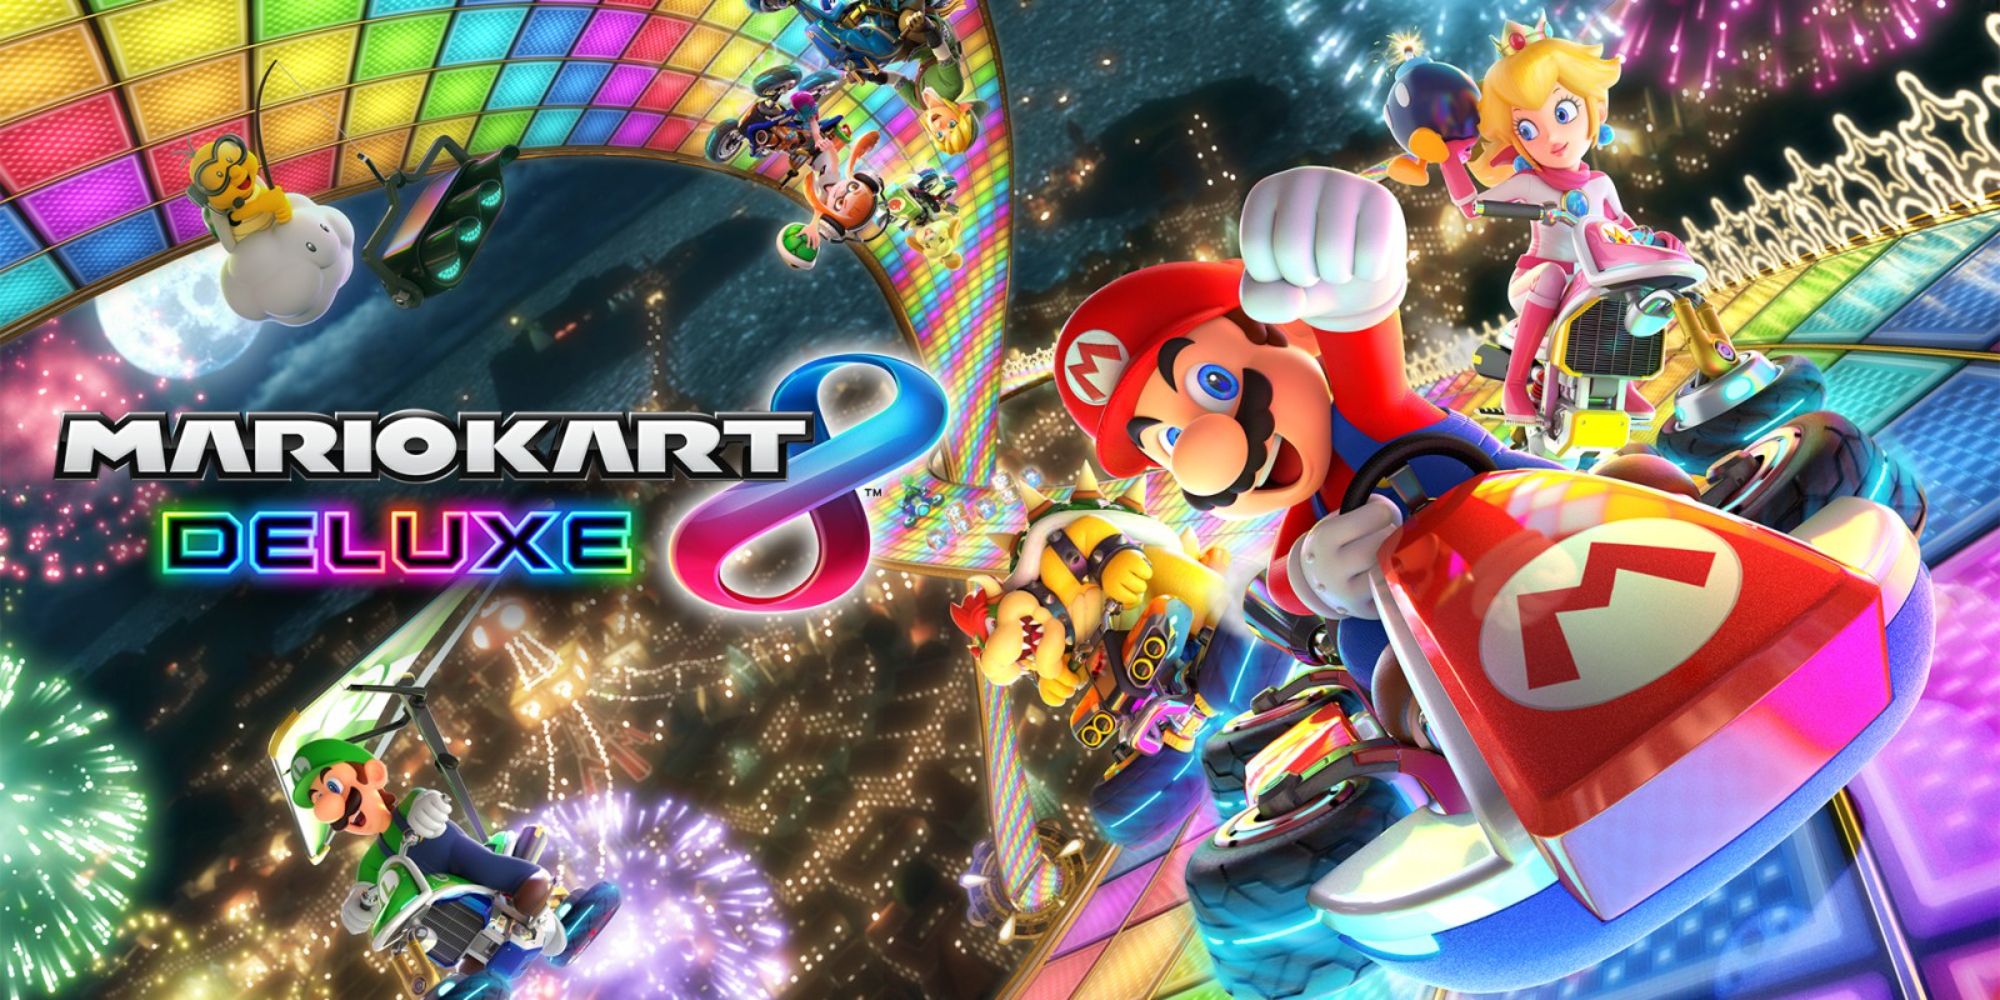 Mario Kart 8 Deluxe Poster, with the title to the left and Mario and Peach in their cars on rainbow road